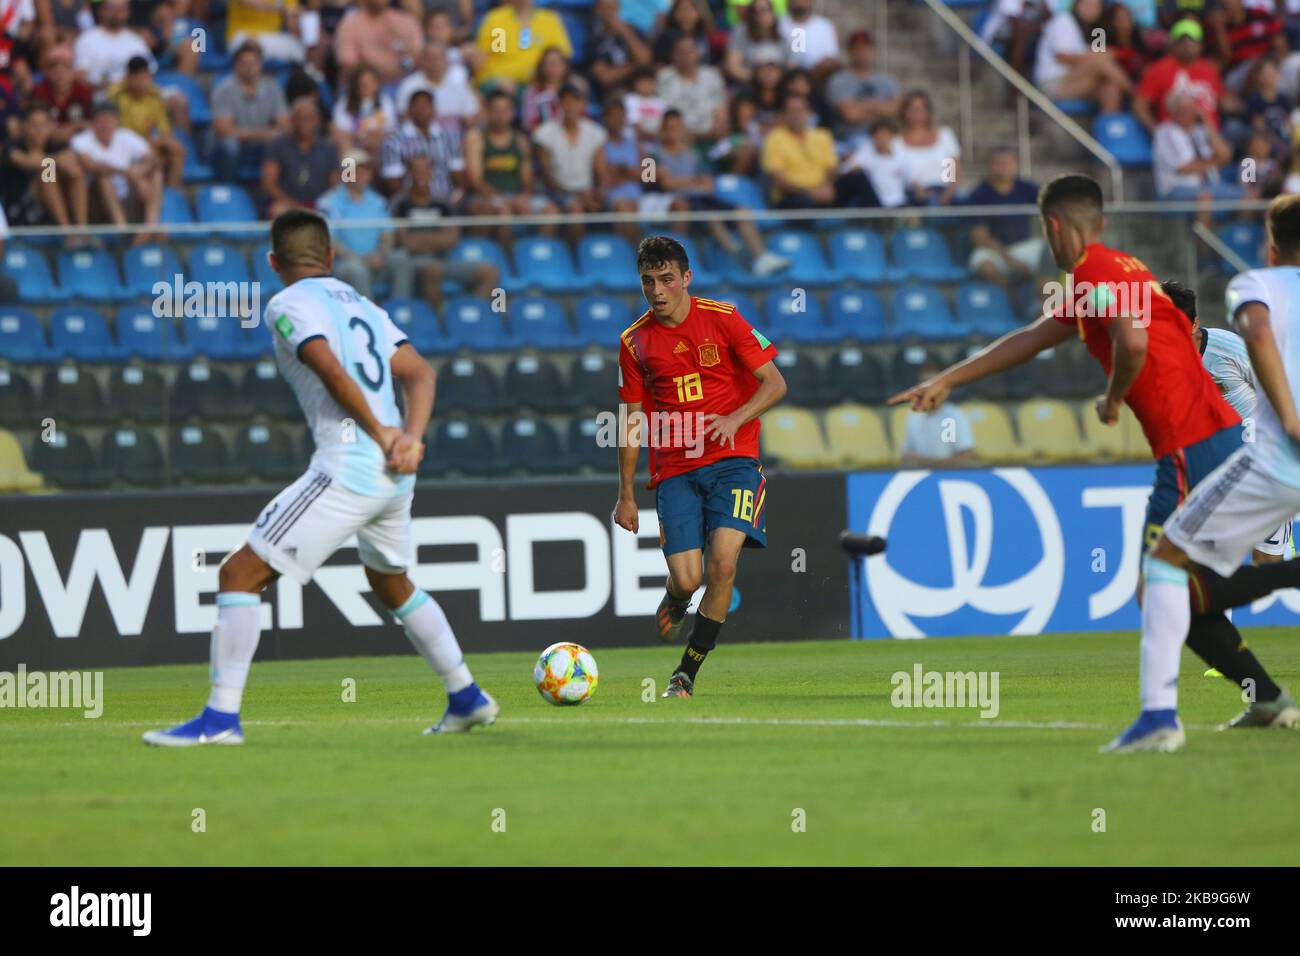 Pedro Gonzalez Lopez, Pedri, (C) of Spain in action during the FIFA U-17 World Cup Brazil 2019 group E match between Spain and Argentina at Estadio Kleber Andrade on October 28, 2019 in Vitoria, Brazil. (Photo by Gilson Borba/NurPhoto) Stock Photo